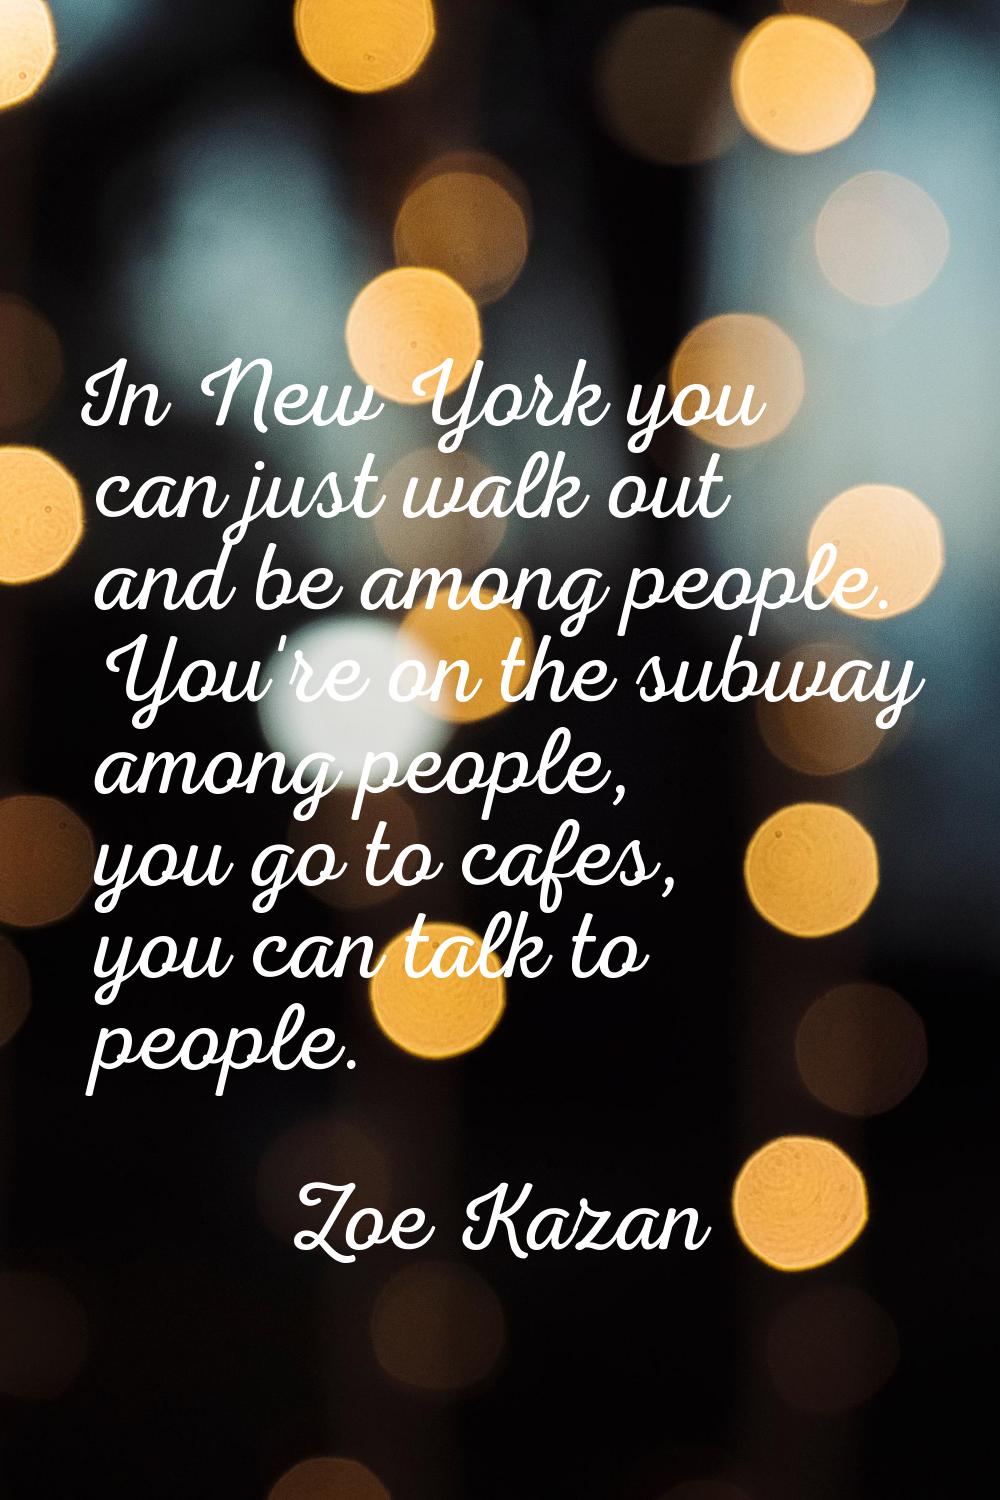 In New York you can just walk out and be among people. You're on the subway among people, you go to